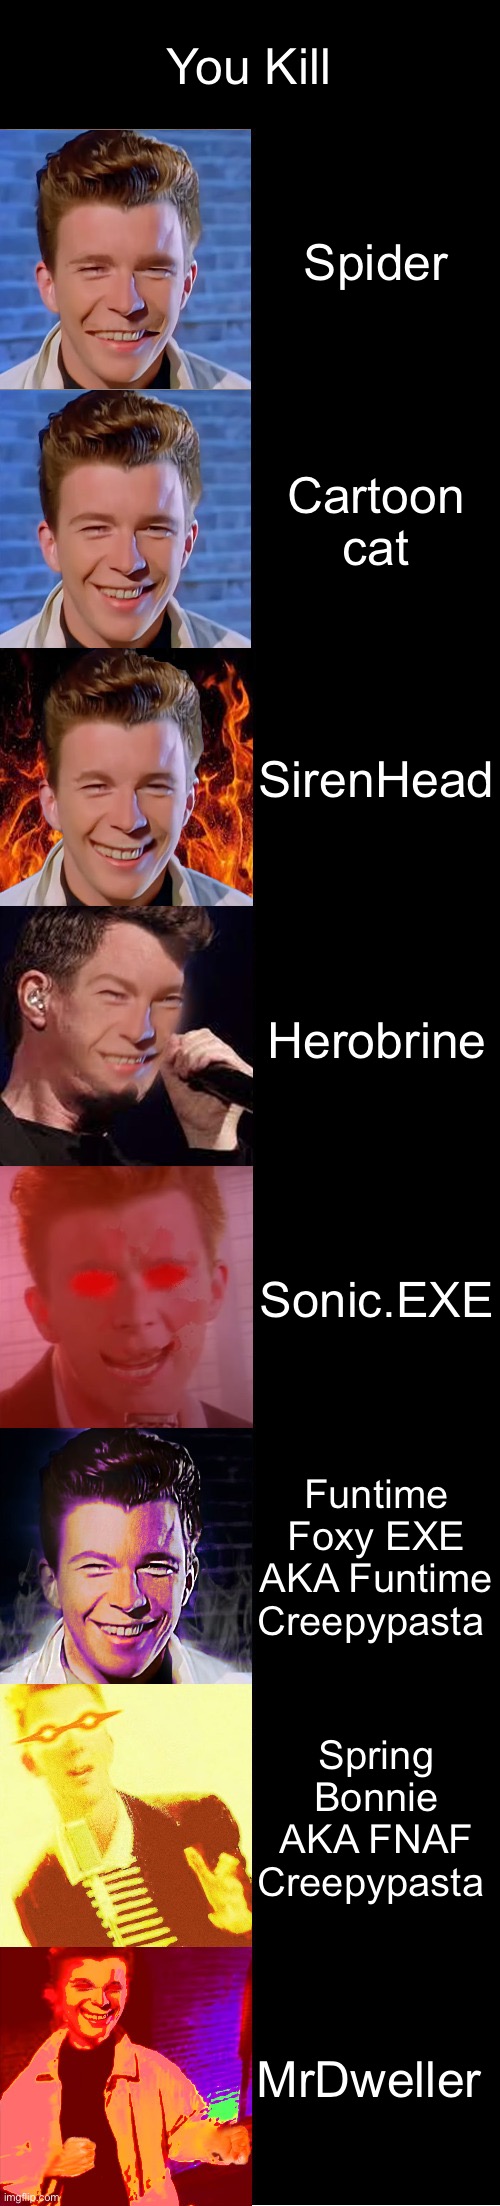 Sorry, mistake. (why was I thinking this?) | You Kill; Spider; Cartoon cat; SirenHead; Herobrine; Sonic.EXE; Funtime Foxy EXE AKA Funtime Creepypasta; Spring Bonnie AKA FNAF Creepypasta; MrDweller | image tagged in rick astley becoming evil | made w/ Imgflip meme maker